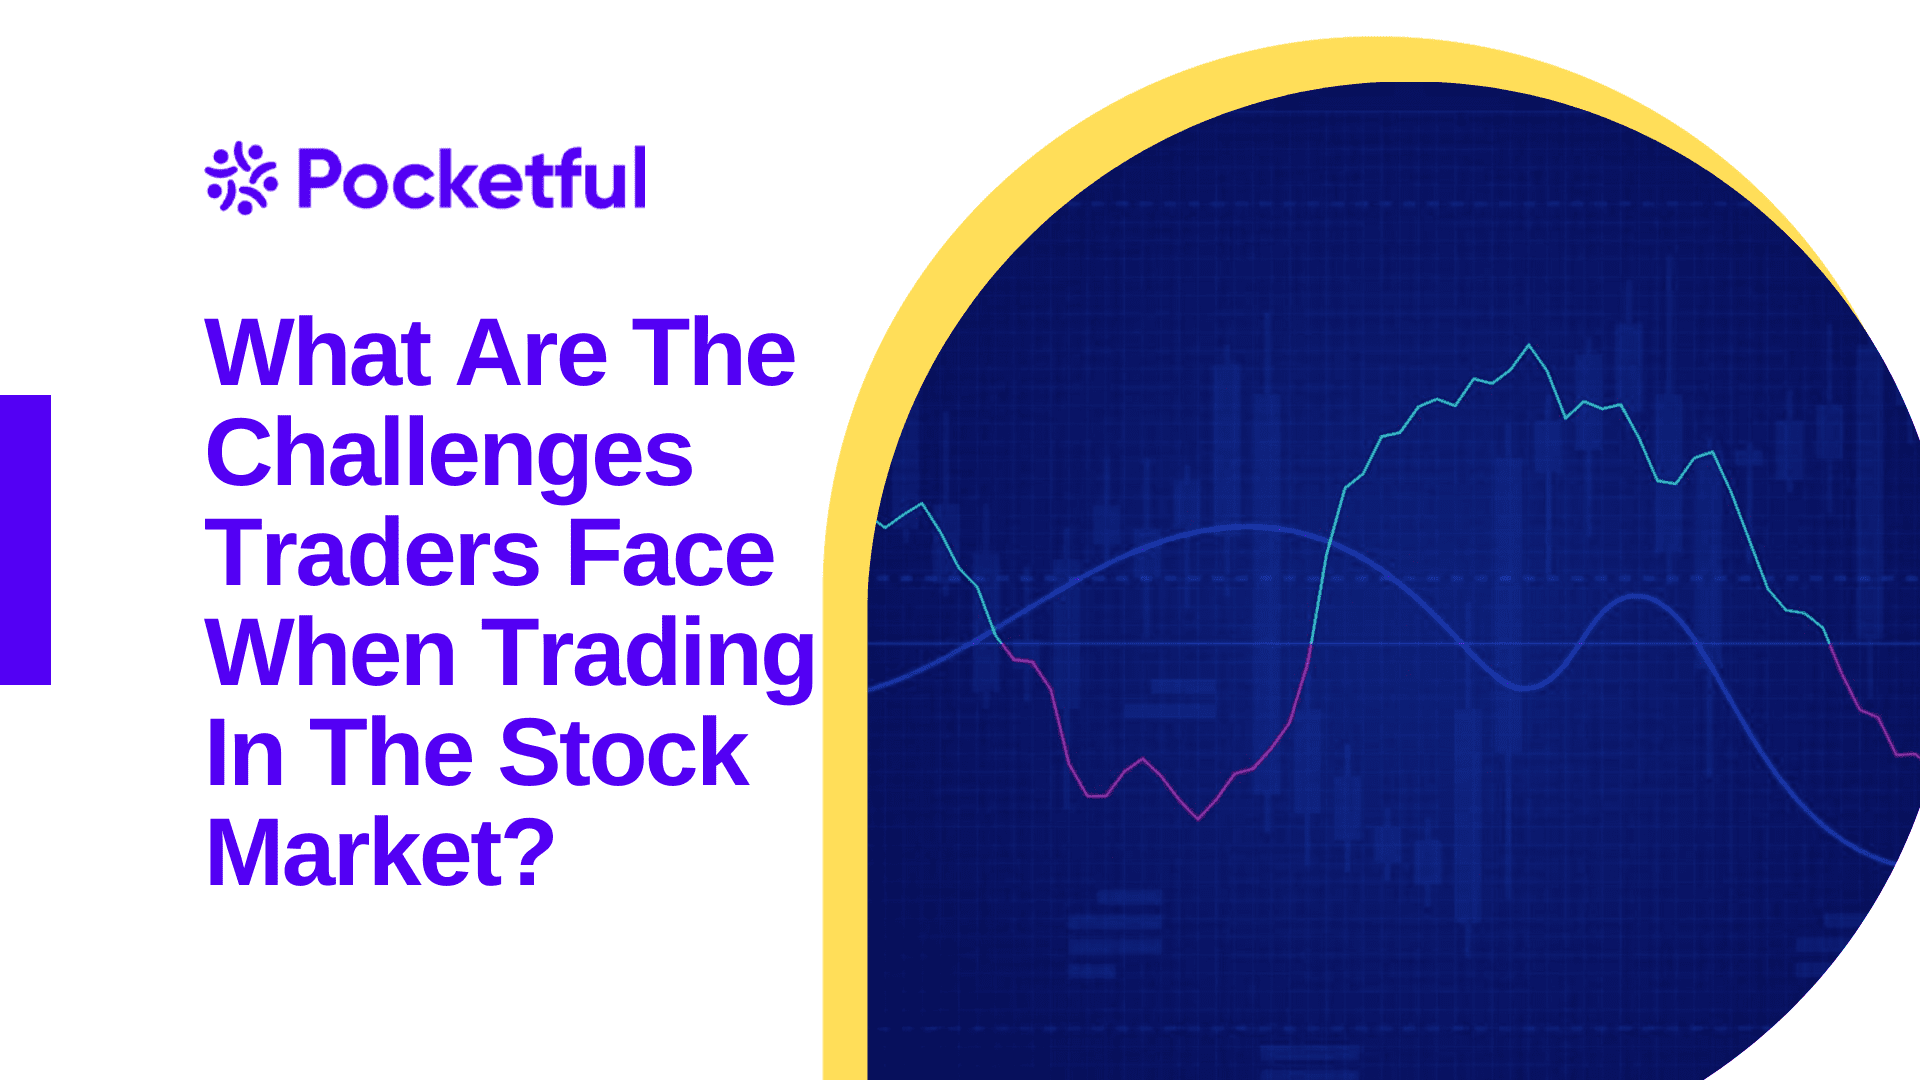 What Are The Challenges Traders Face When Trading In The Stock Market?